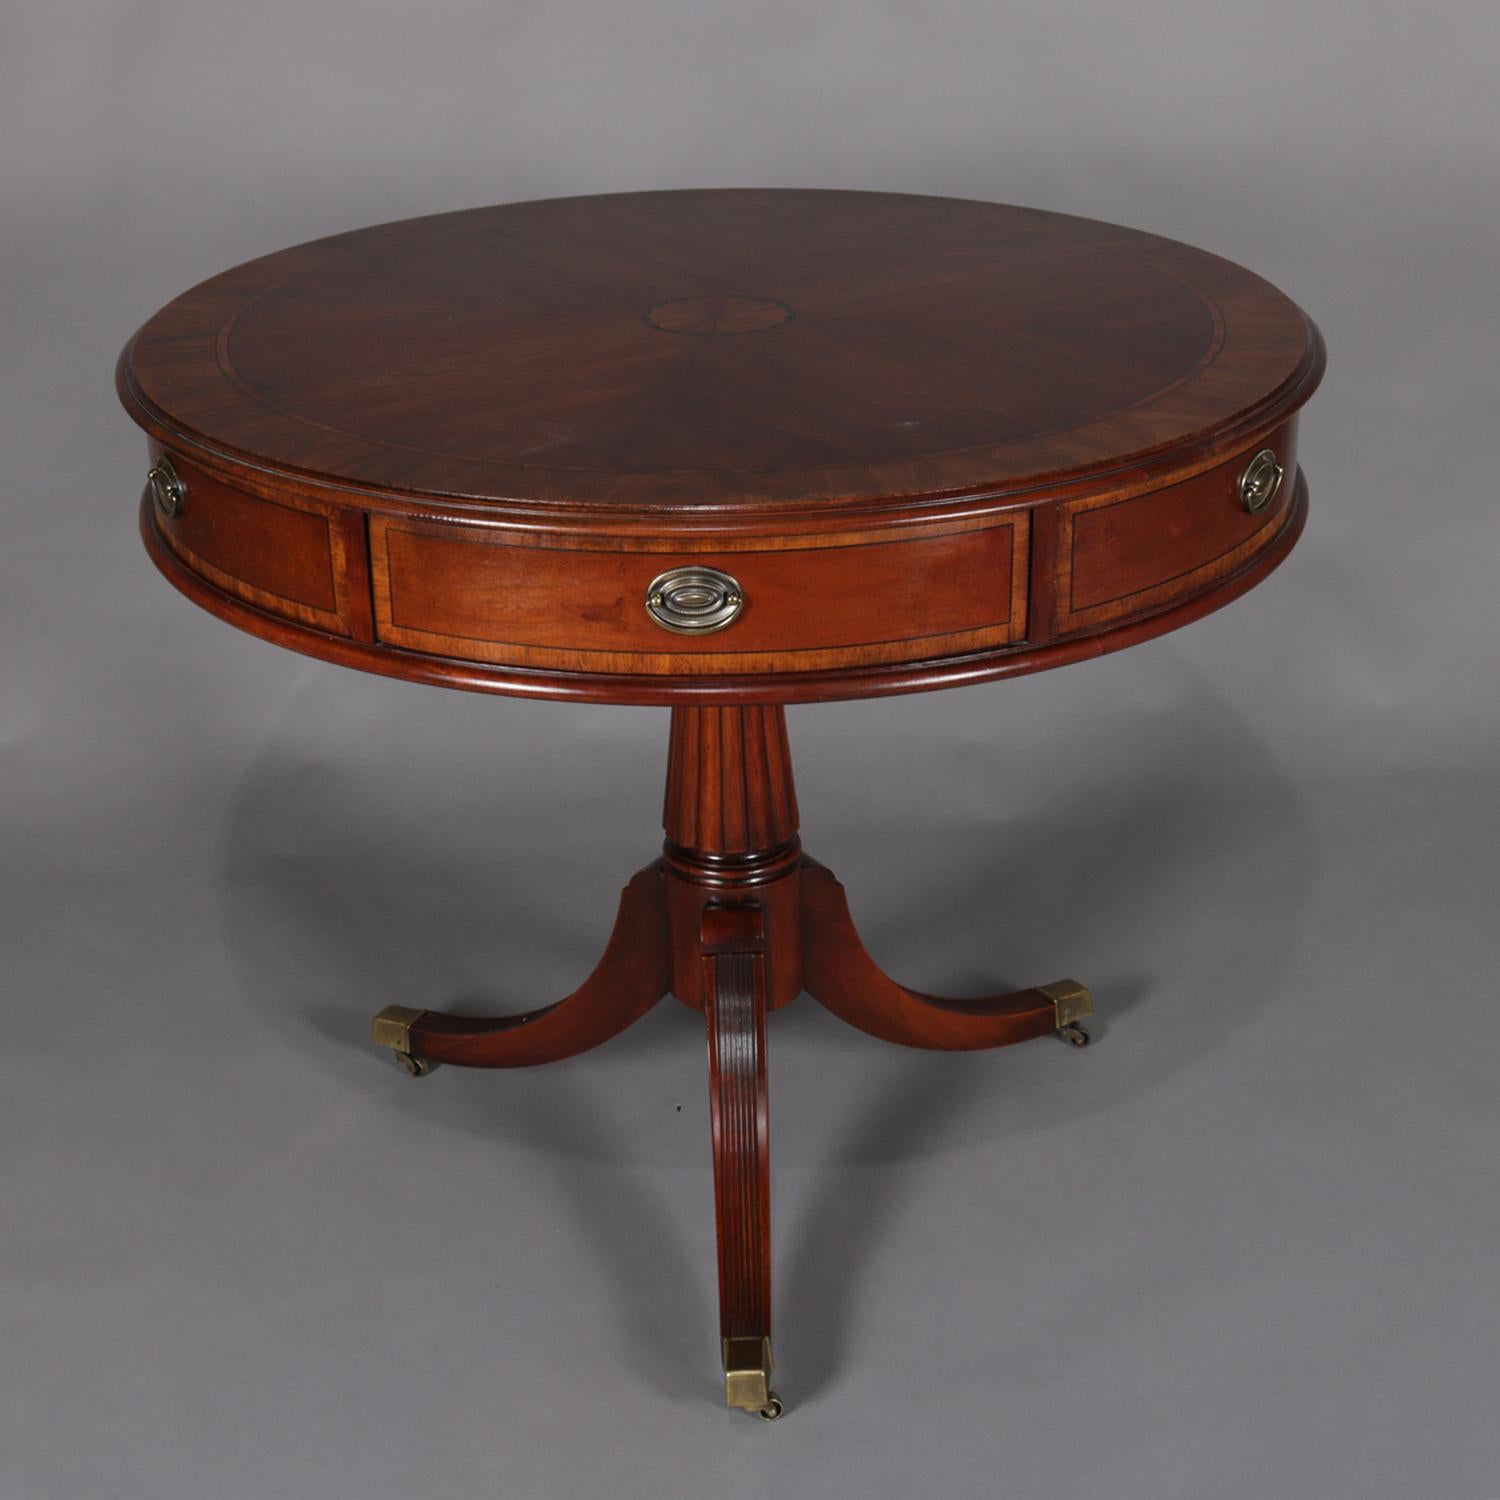 An English Regency style center table by Lexington in the Palmer Home line featuring circular drum form with bookmatched top having central inlaid patera medallion over skirt with six drawers, raised on reeded pedestal base with Sheraton Duncan